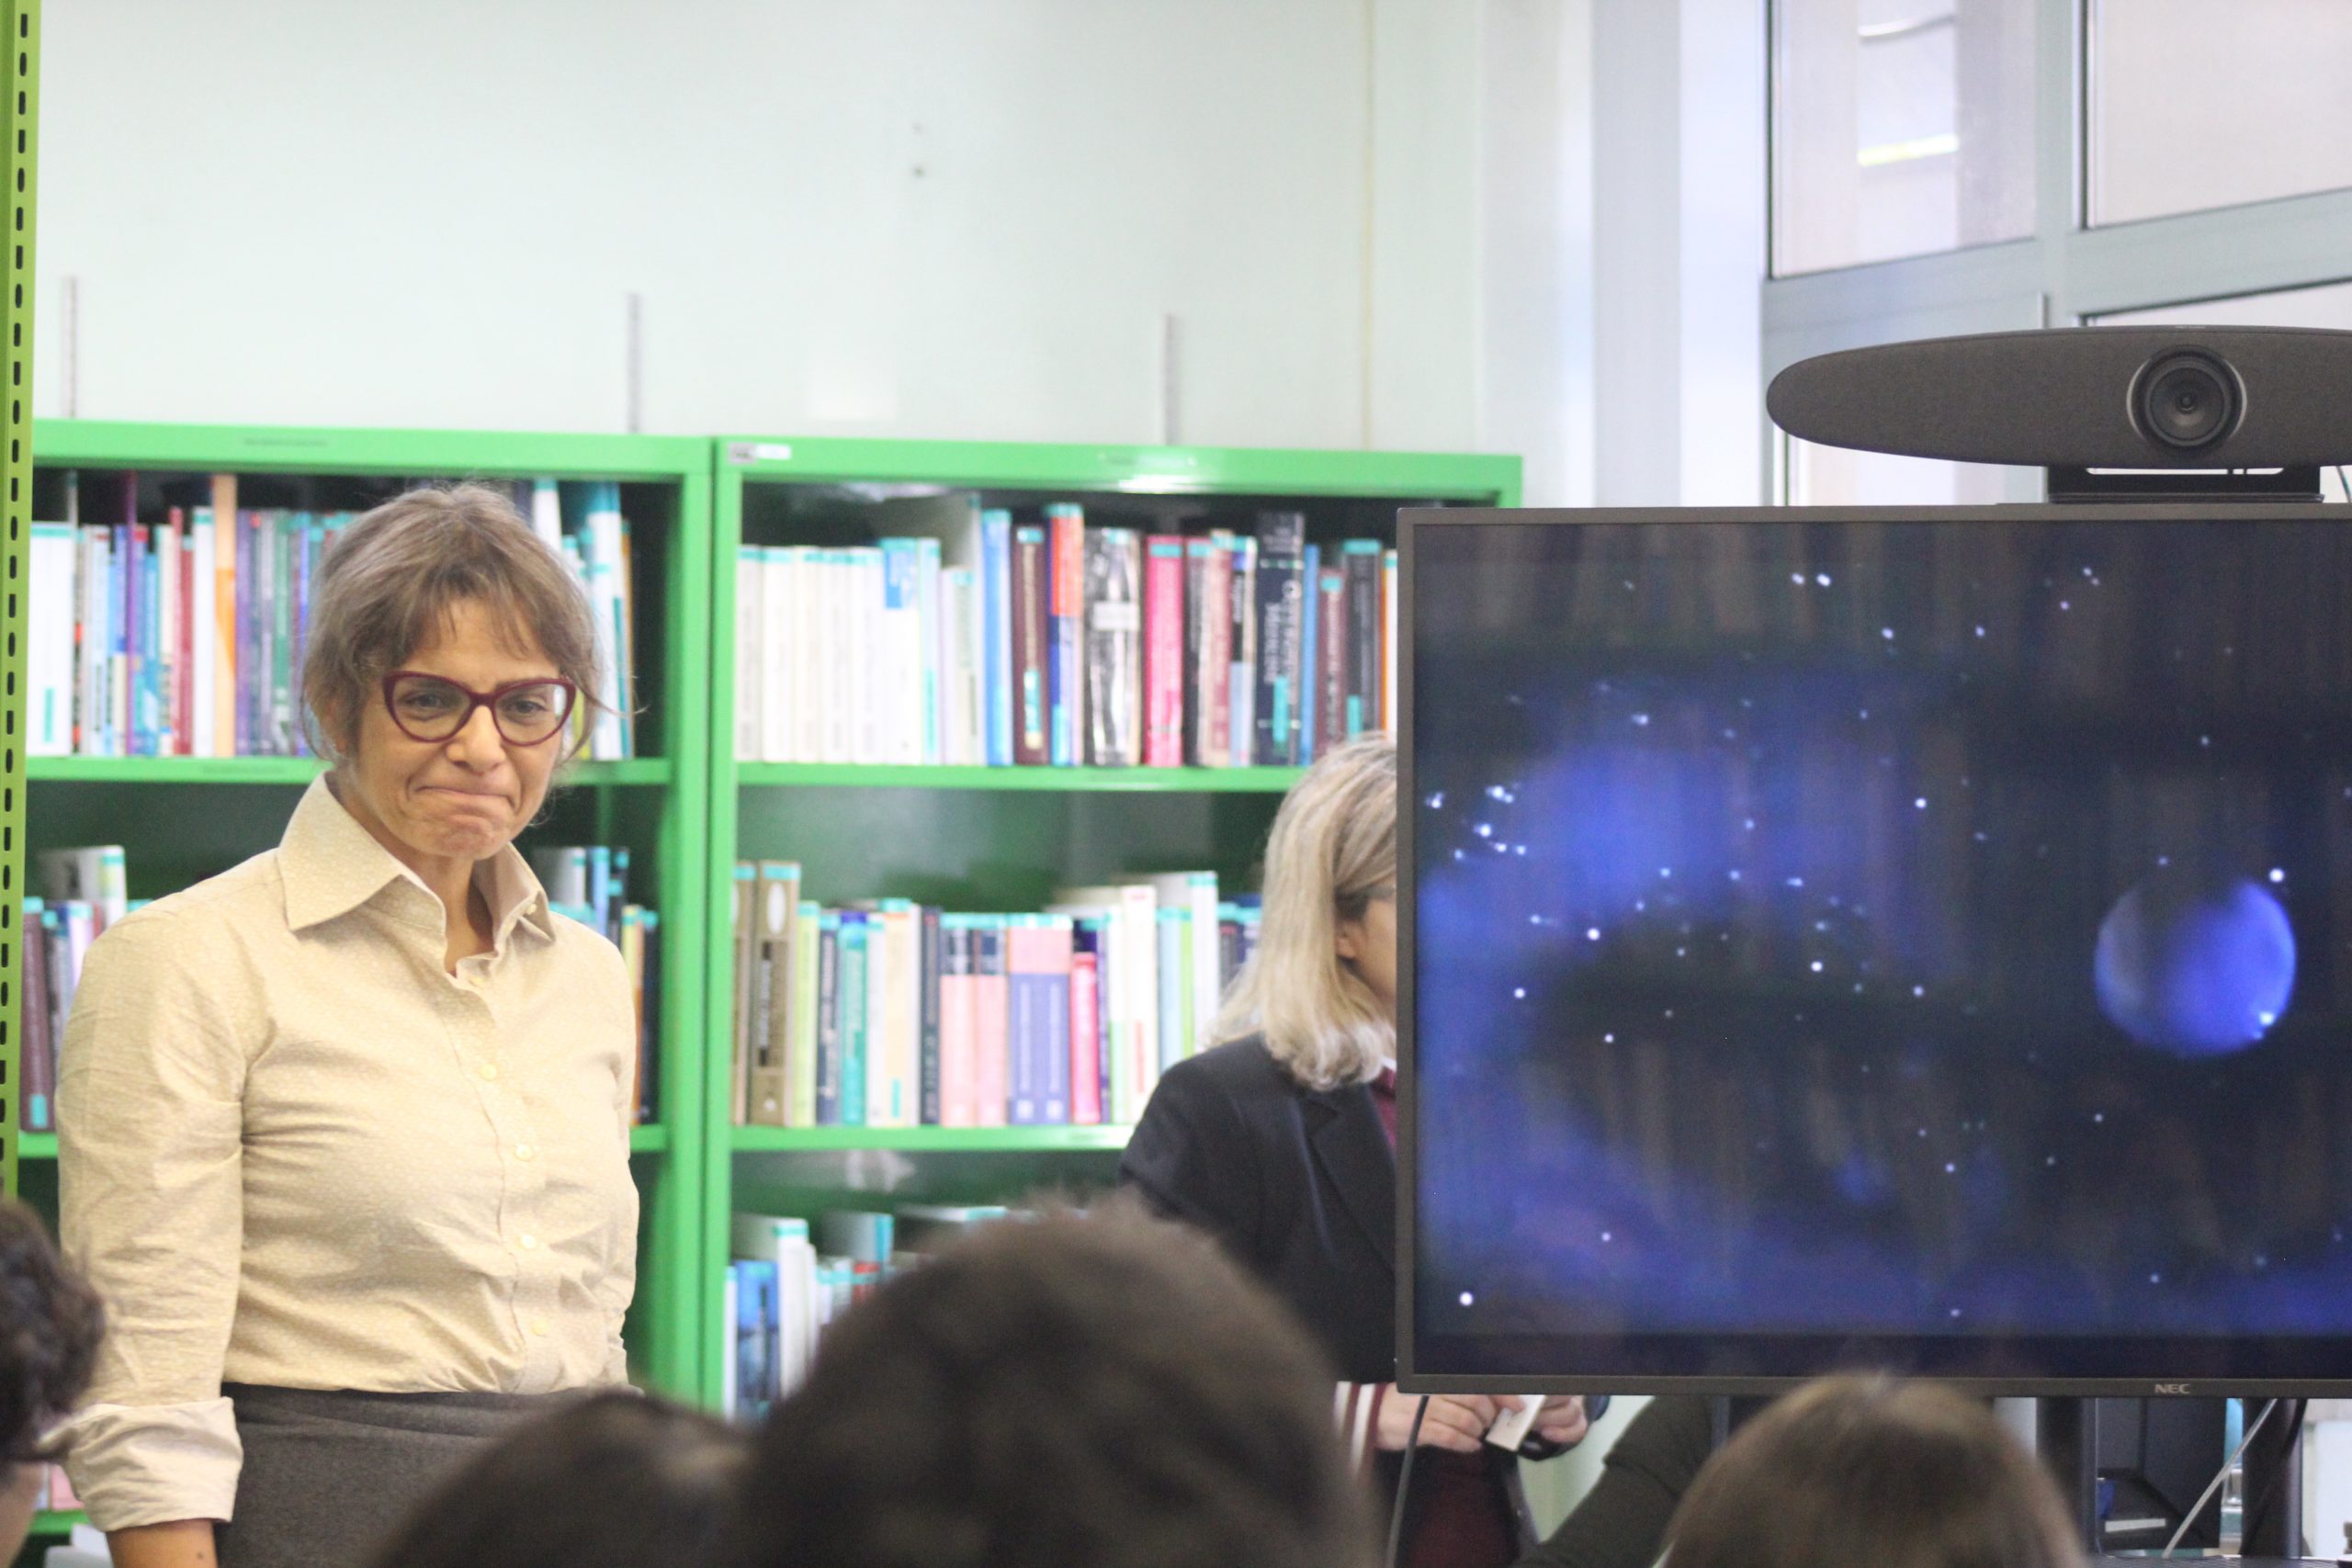 Claudia Pernencar presenting herself to students